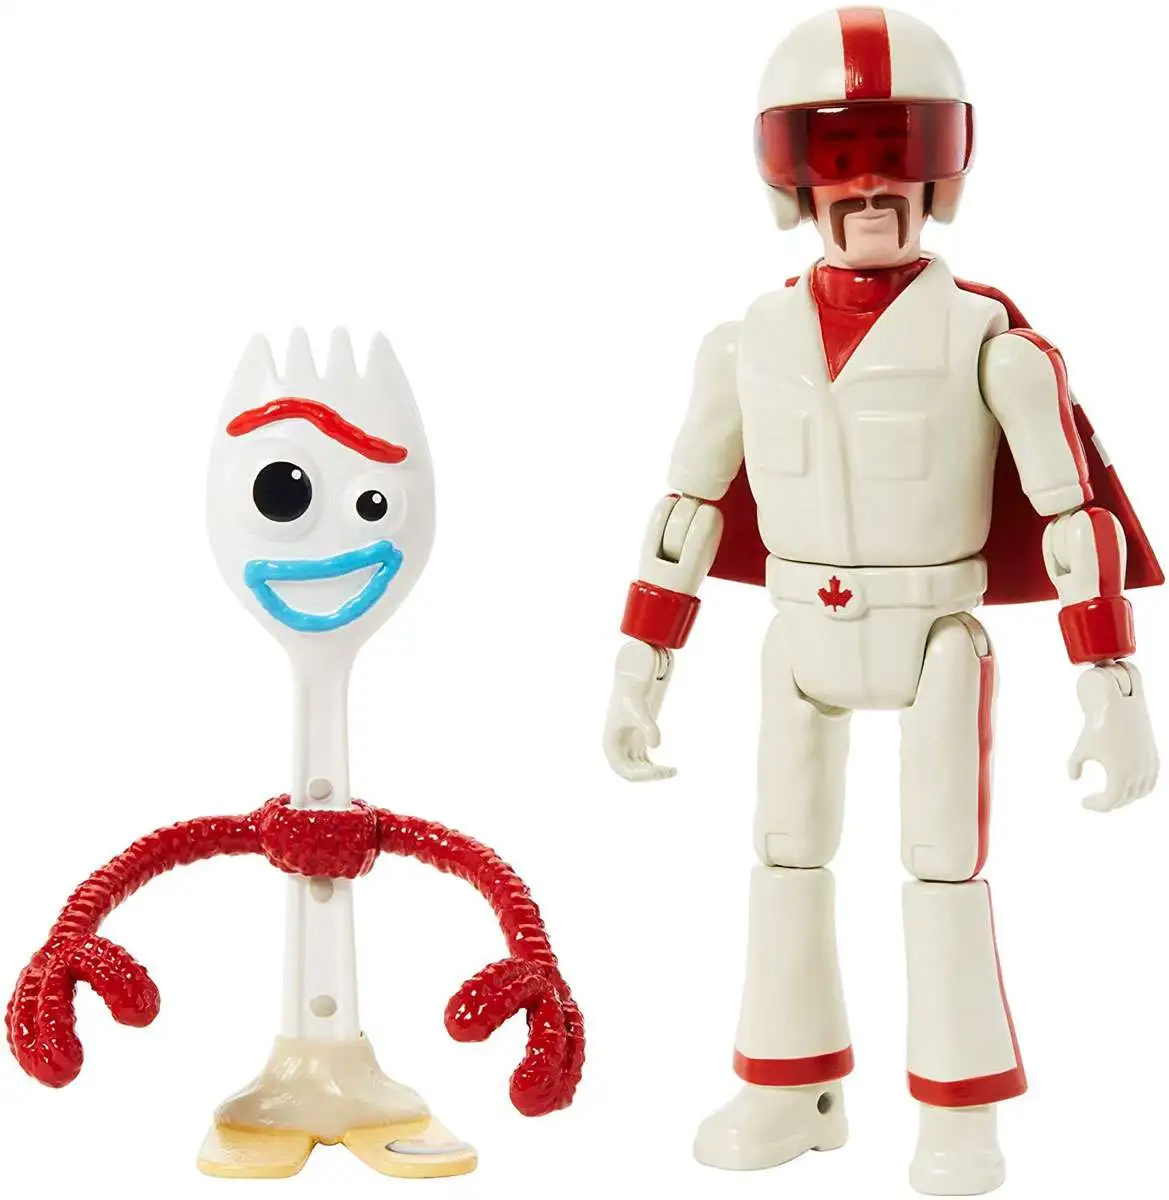 Disney Pixar Toy Story 4 Forky 8" Pull & Go Figure 2019 With Whacky Action! 